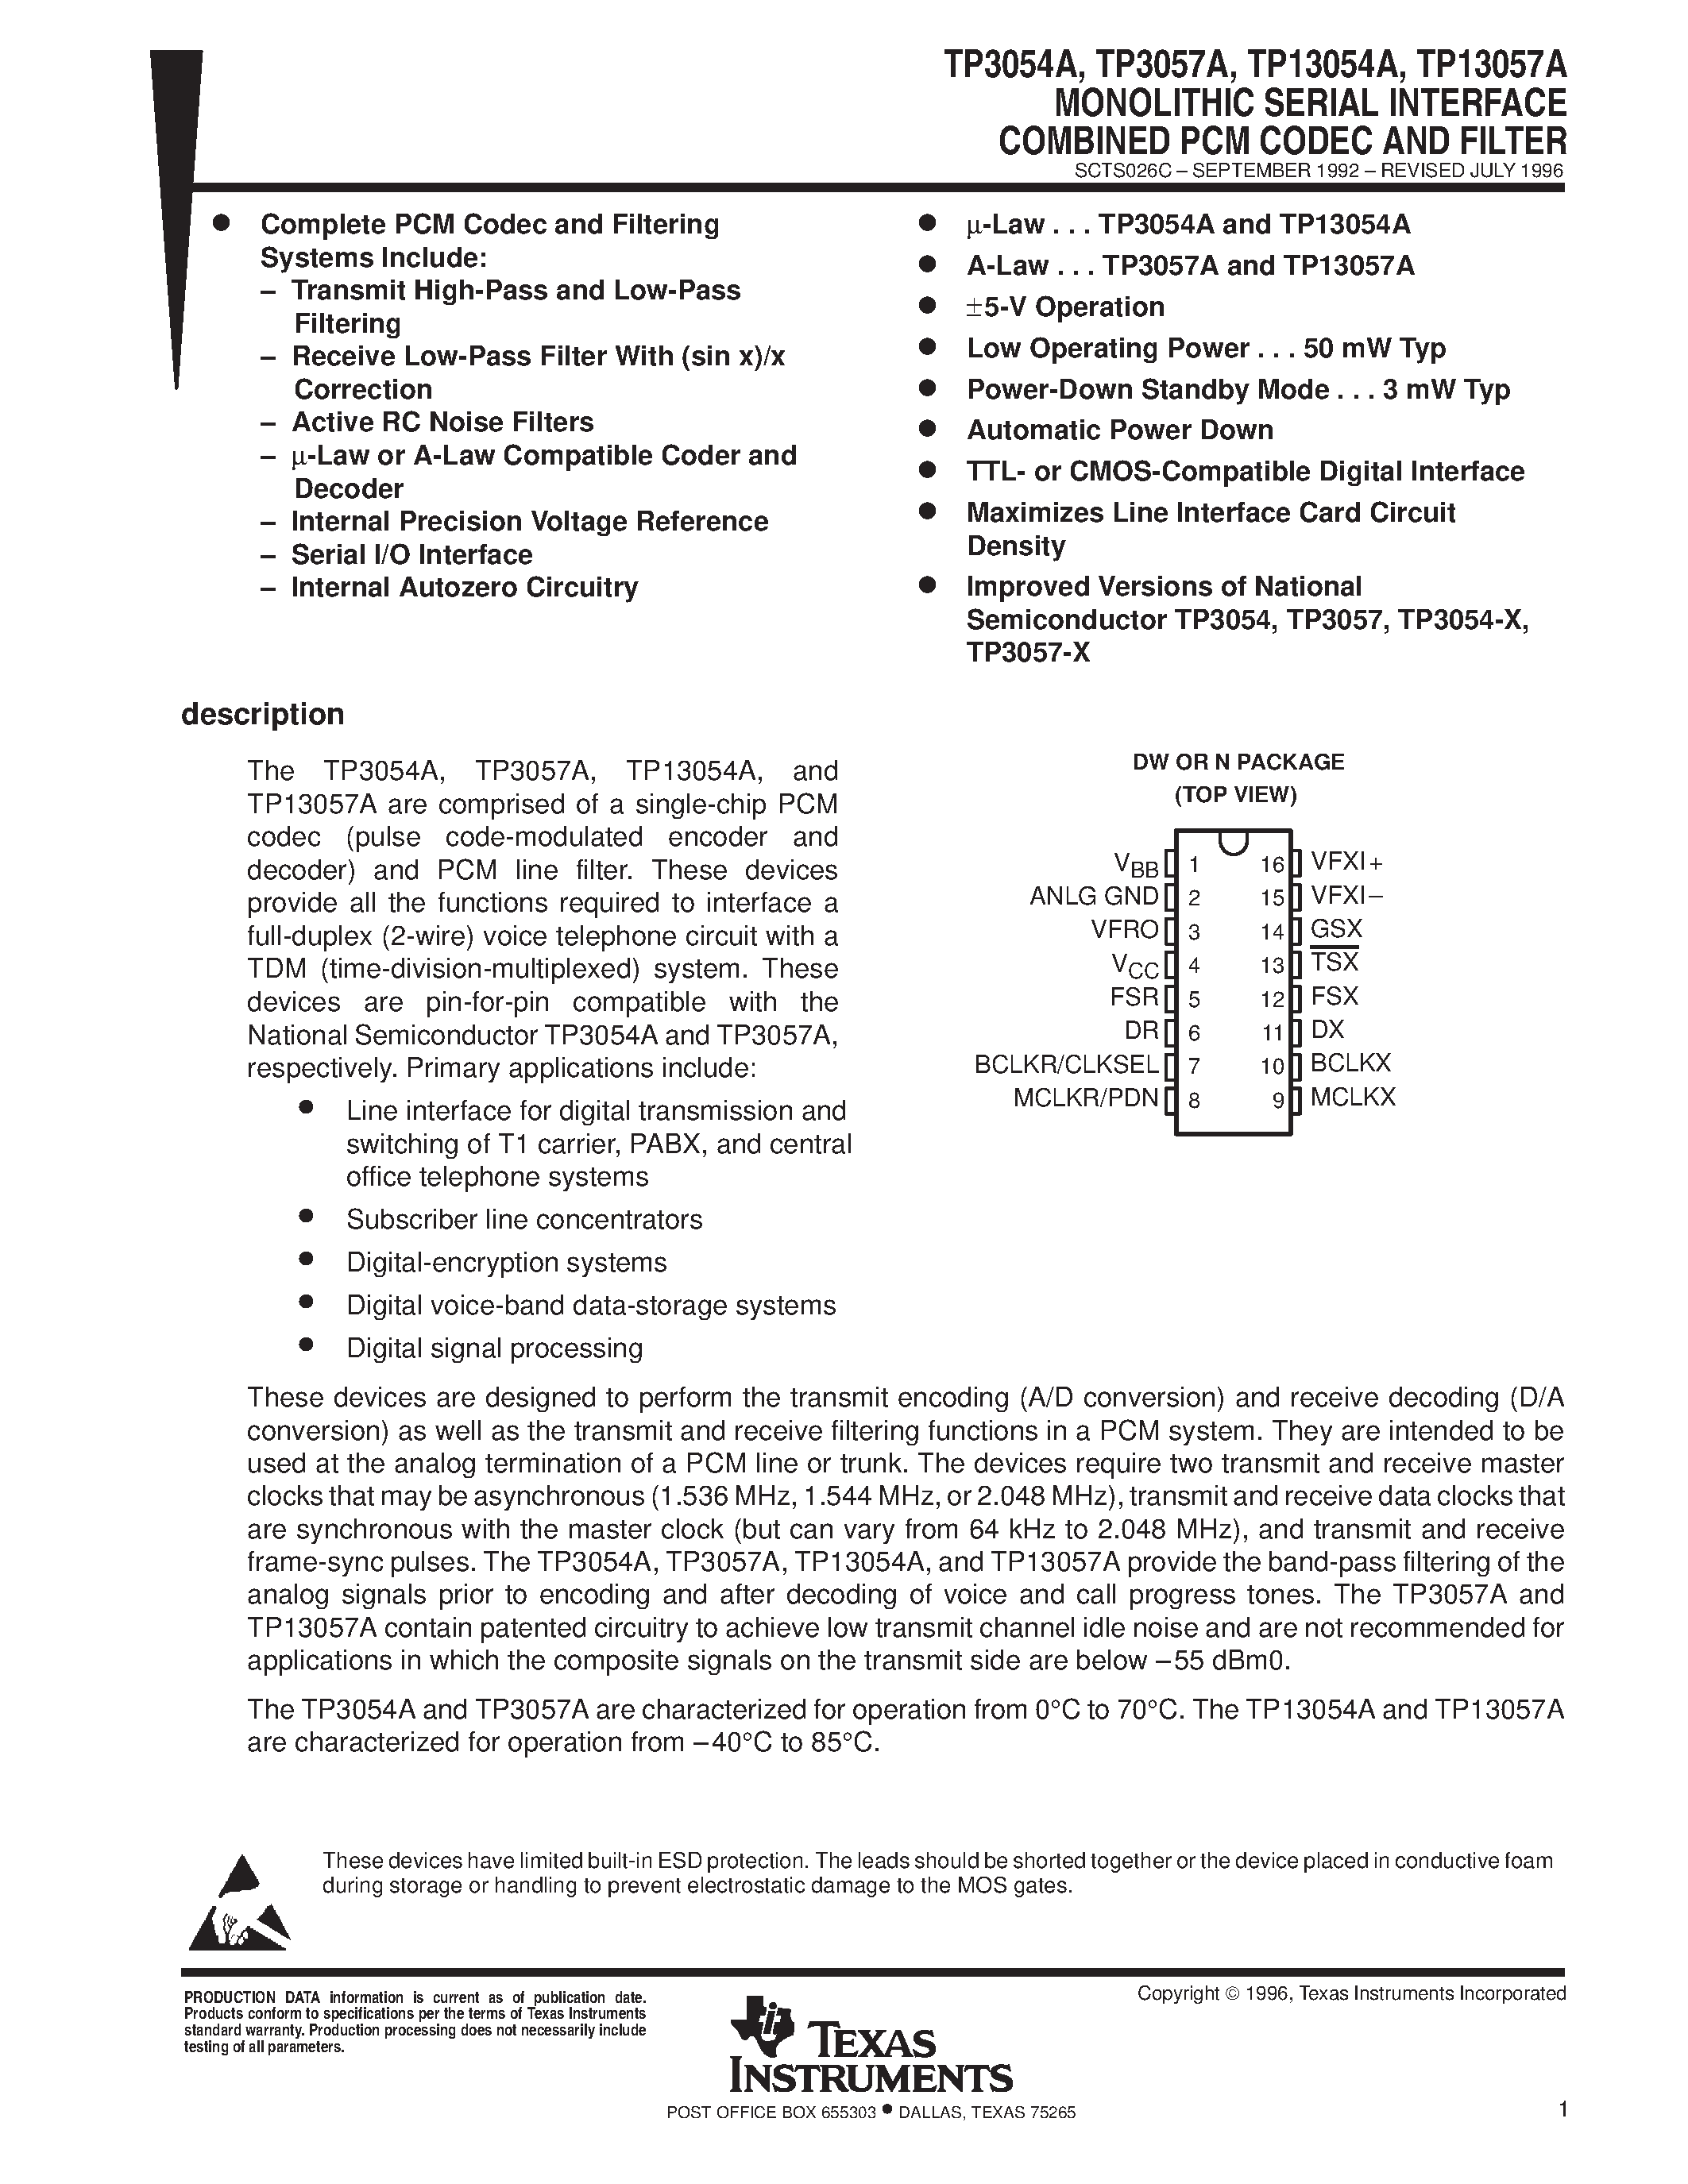 Datasheet TP13054ADW - MONOLITHIC SERIAL INTERFACE COMBINED PCM CODEC AND FILTER page 1